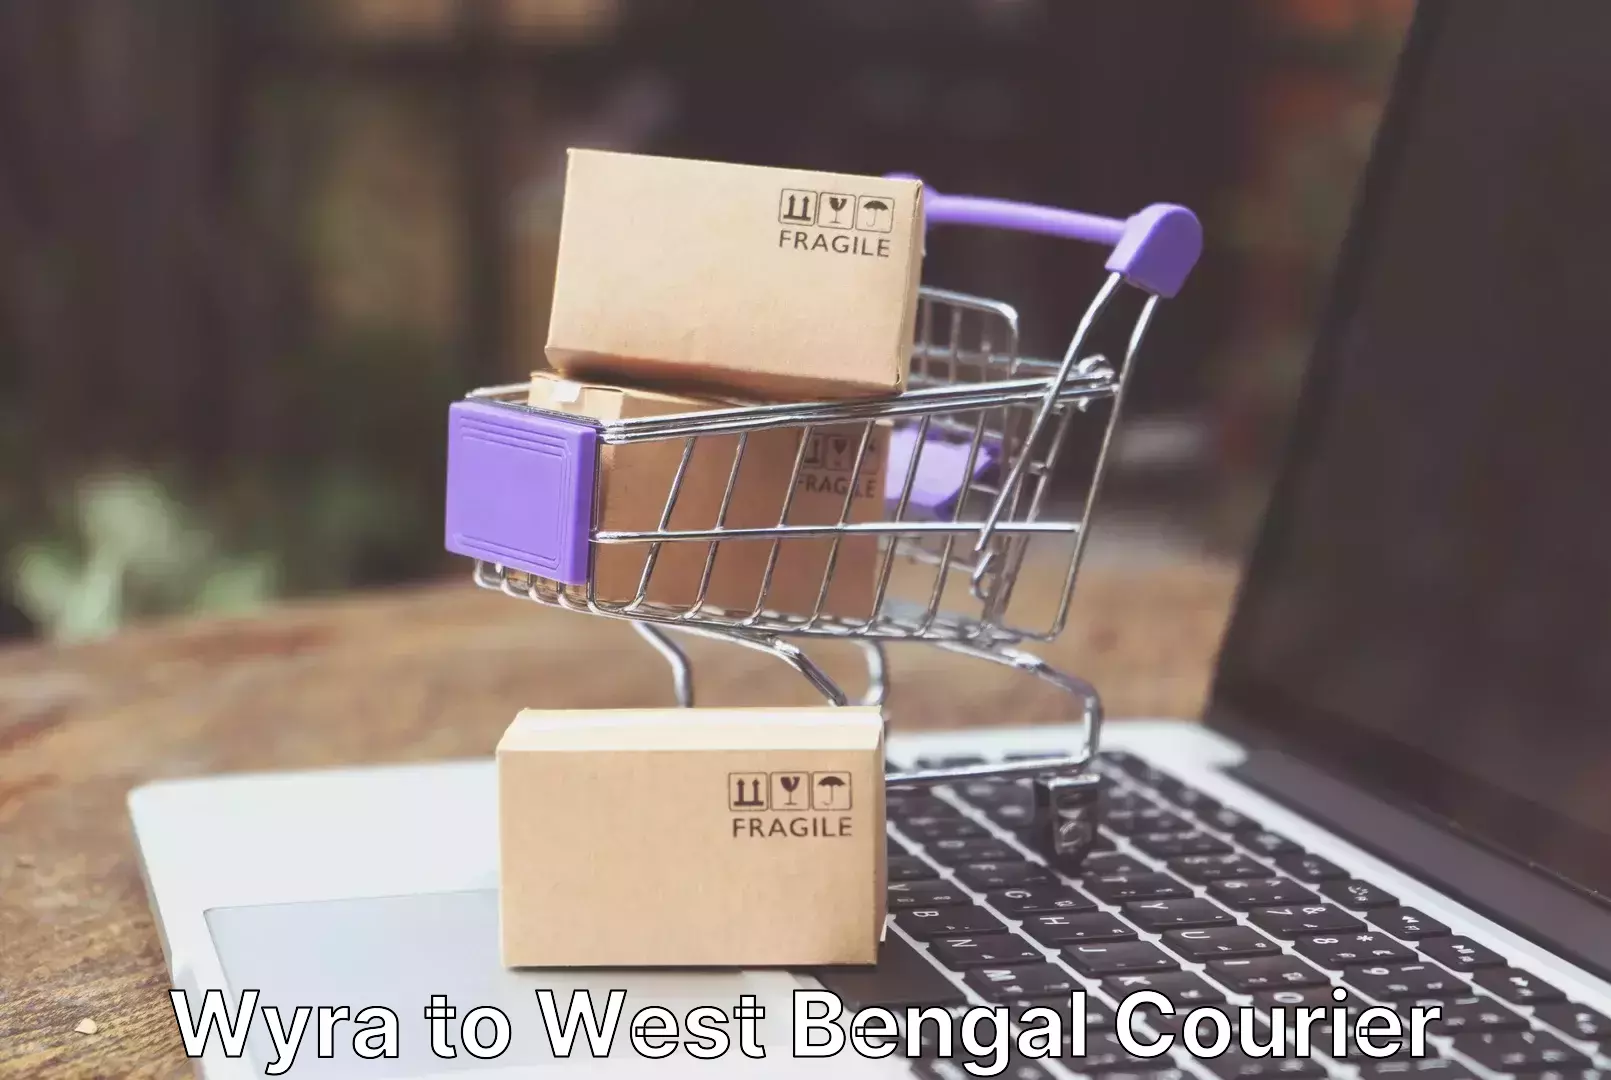 Quality moving company Wyra to West Bengal